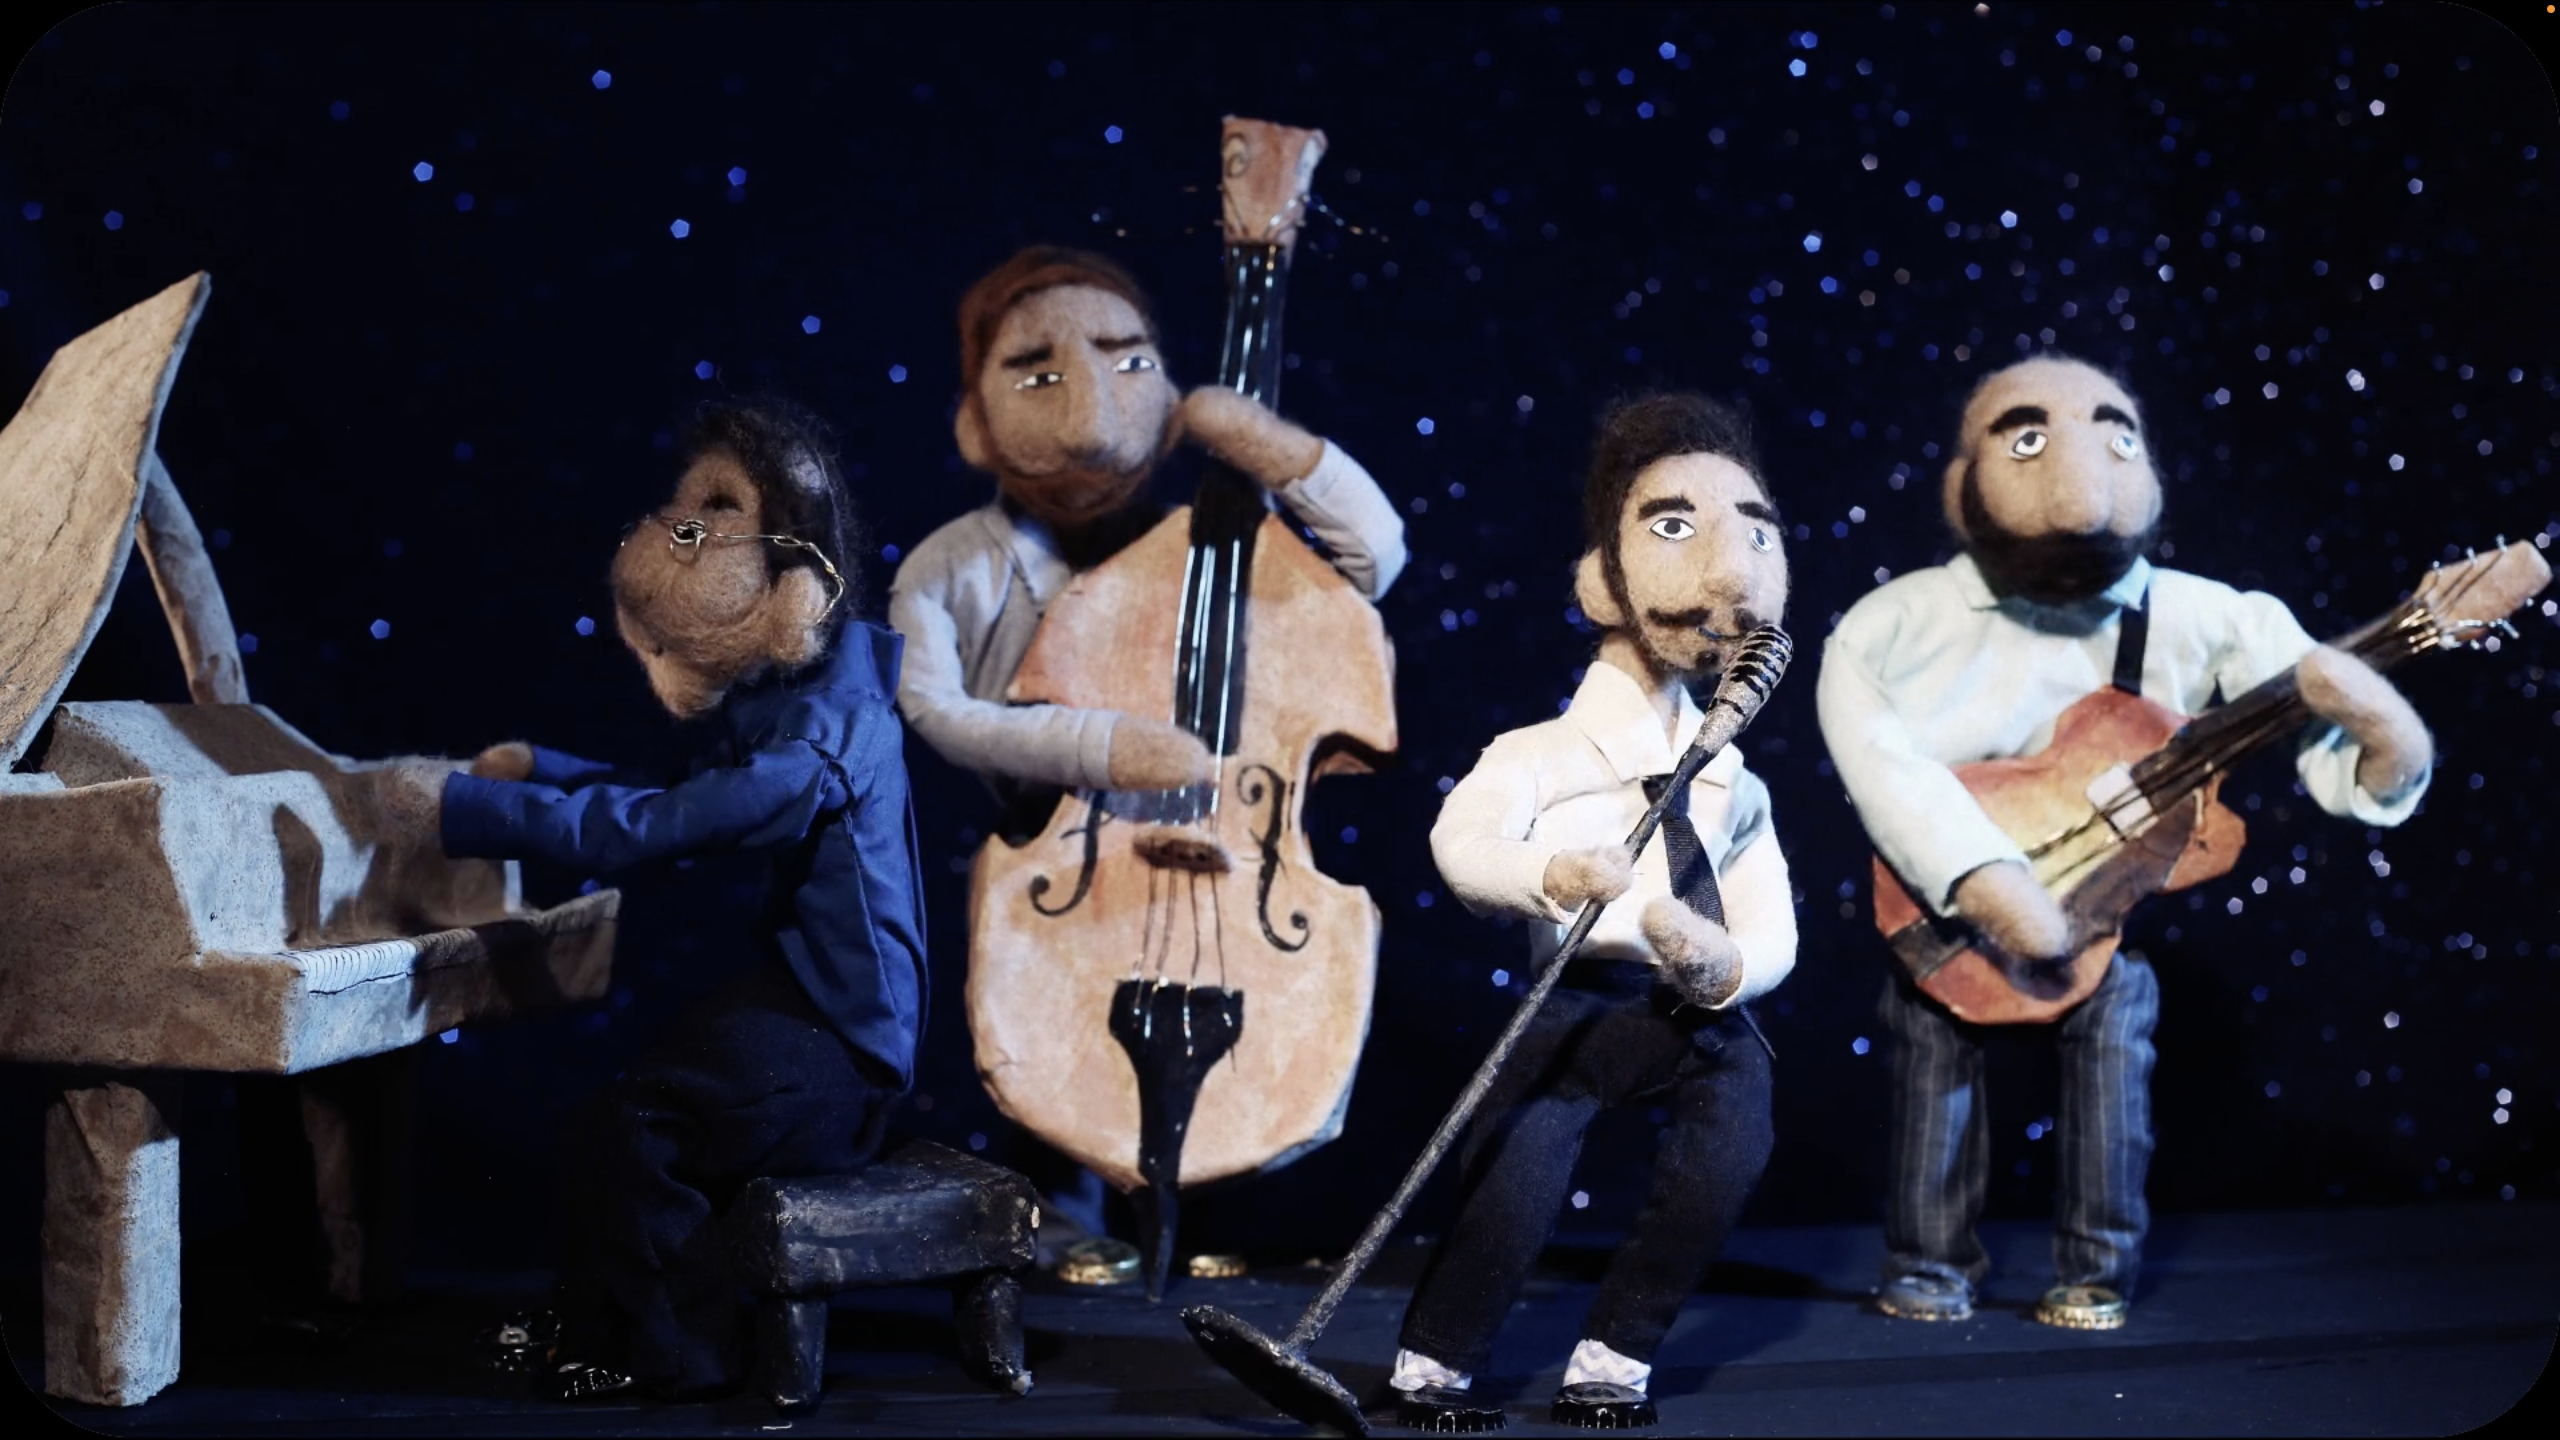 Four felt puppets play in a jazz quartet, in a still from a Cardboard Reality video